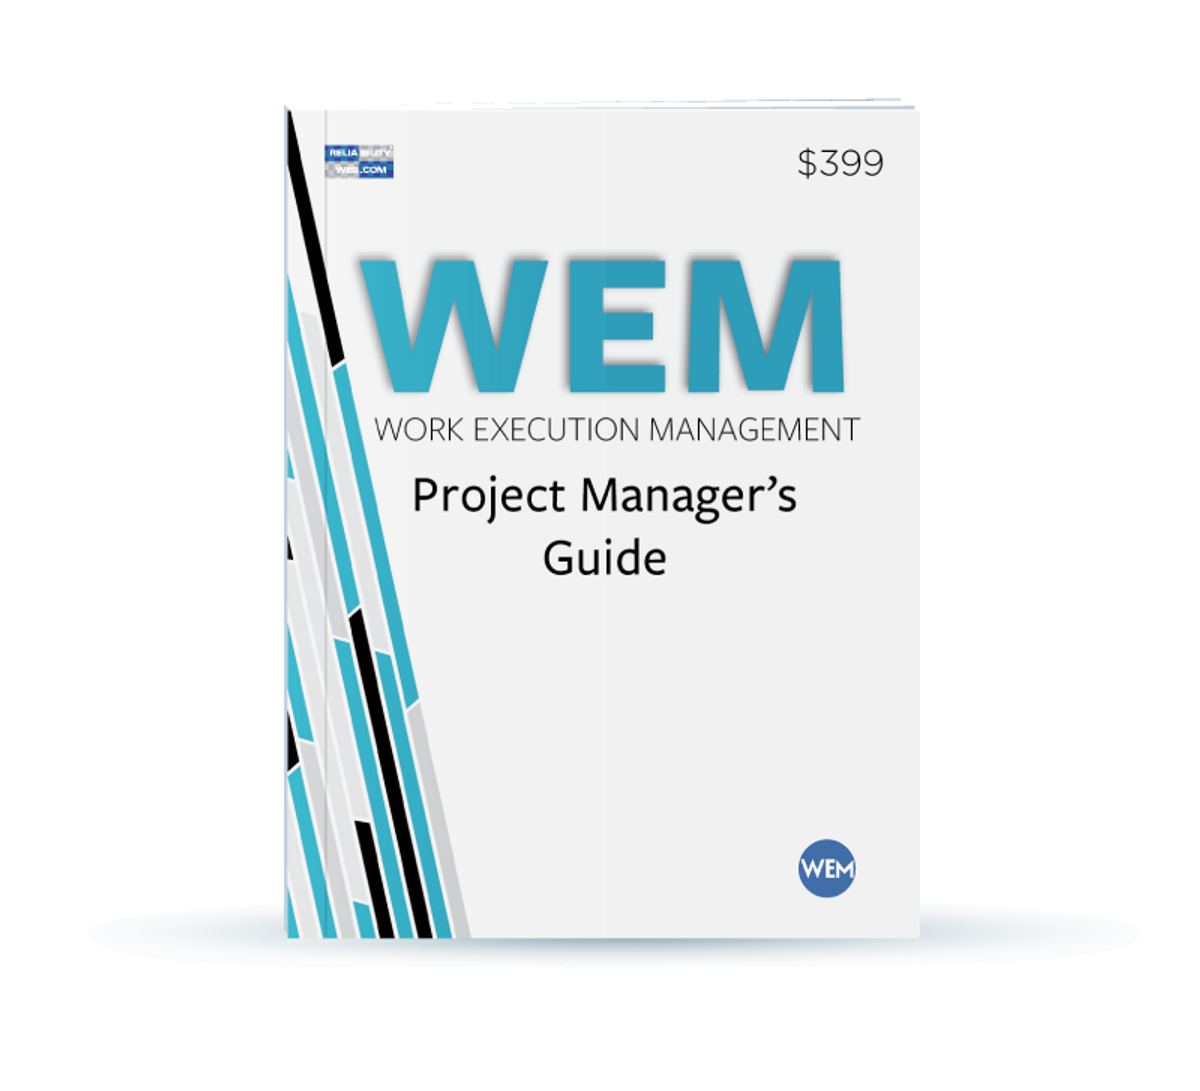 Download the WEM Project Manager's Guide